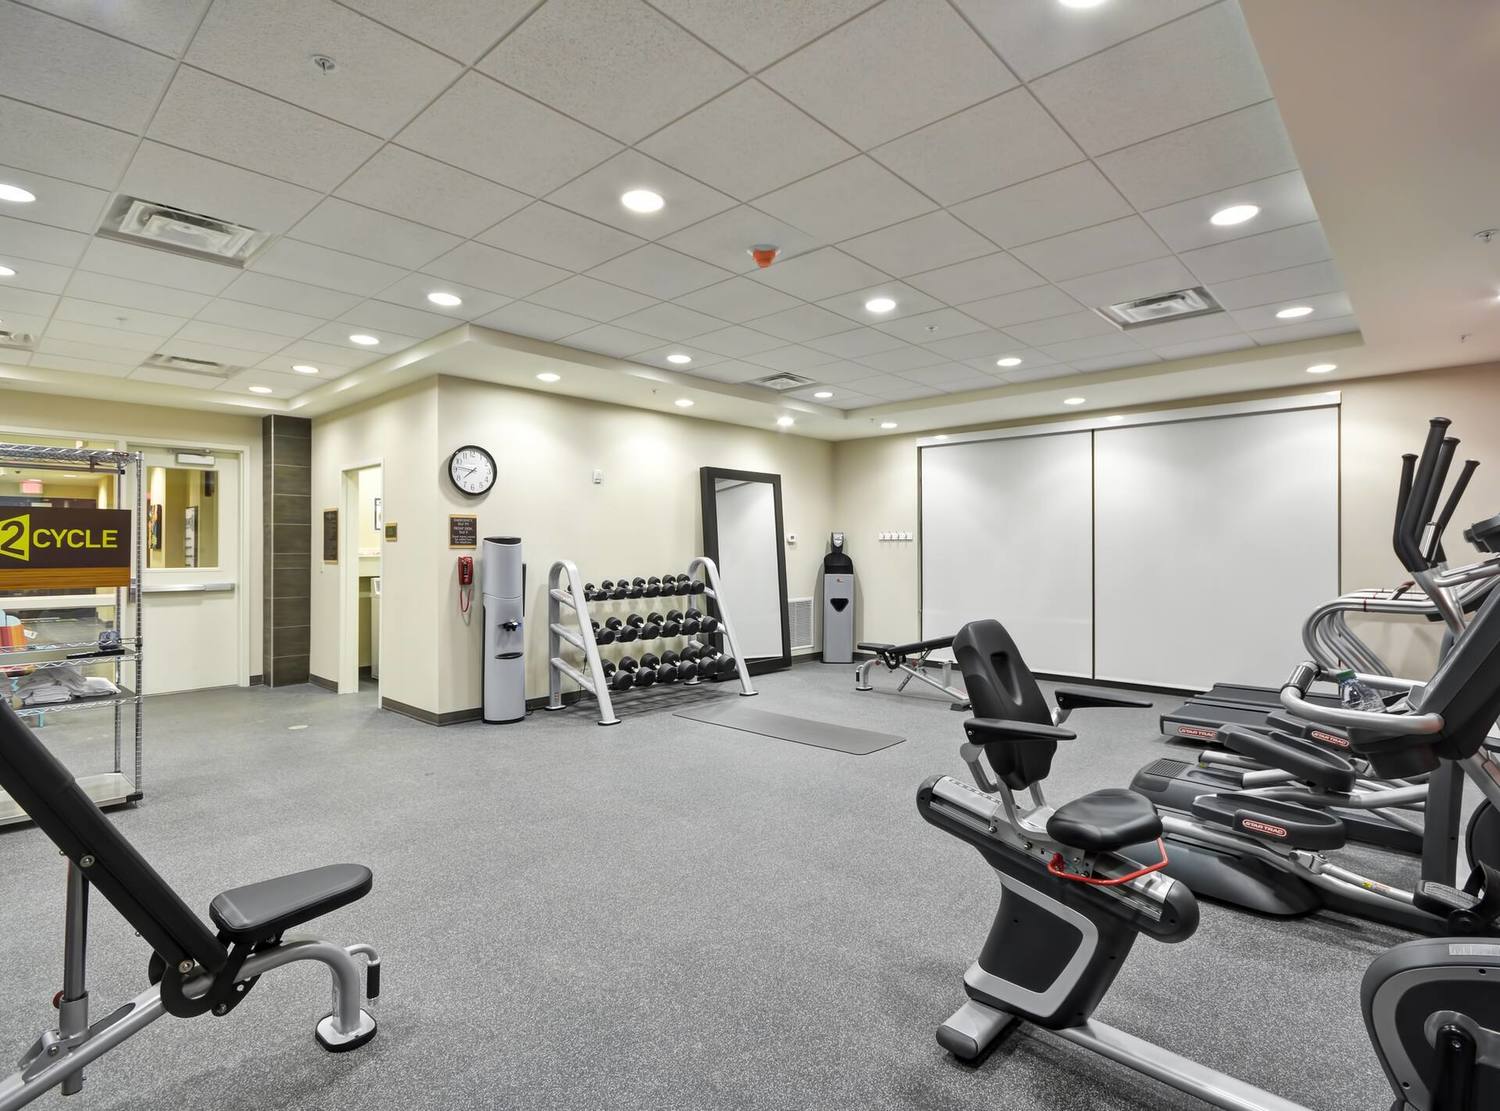 Fitness Center with Cardio Equipment, Weight Rack and Weight Bench